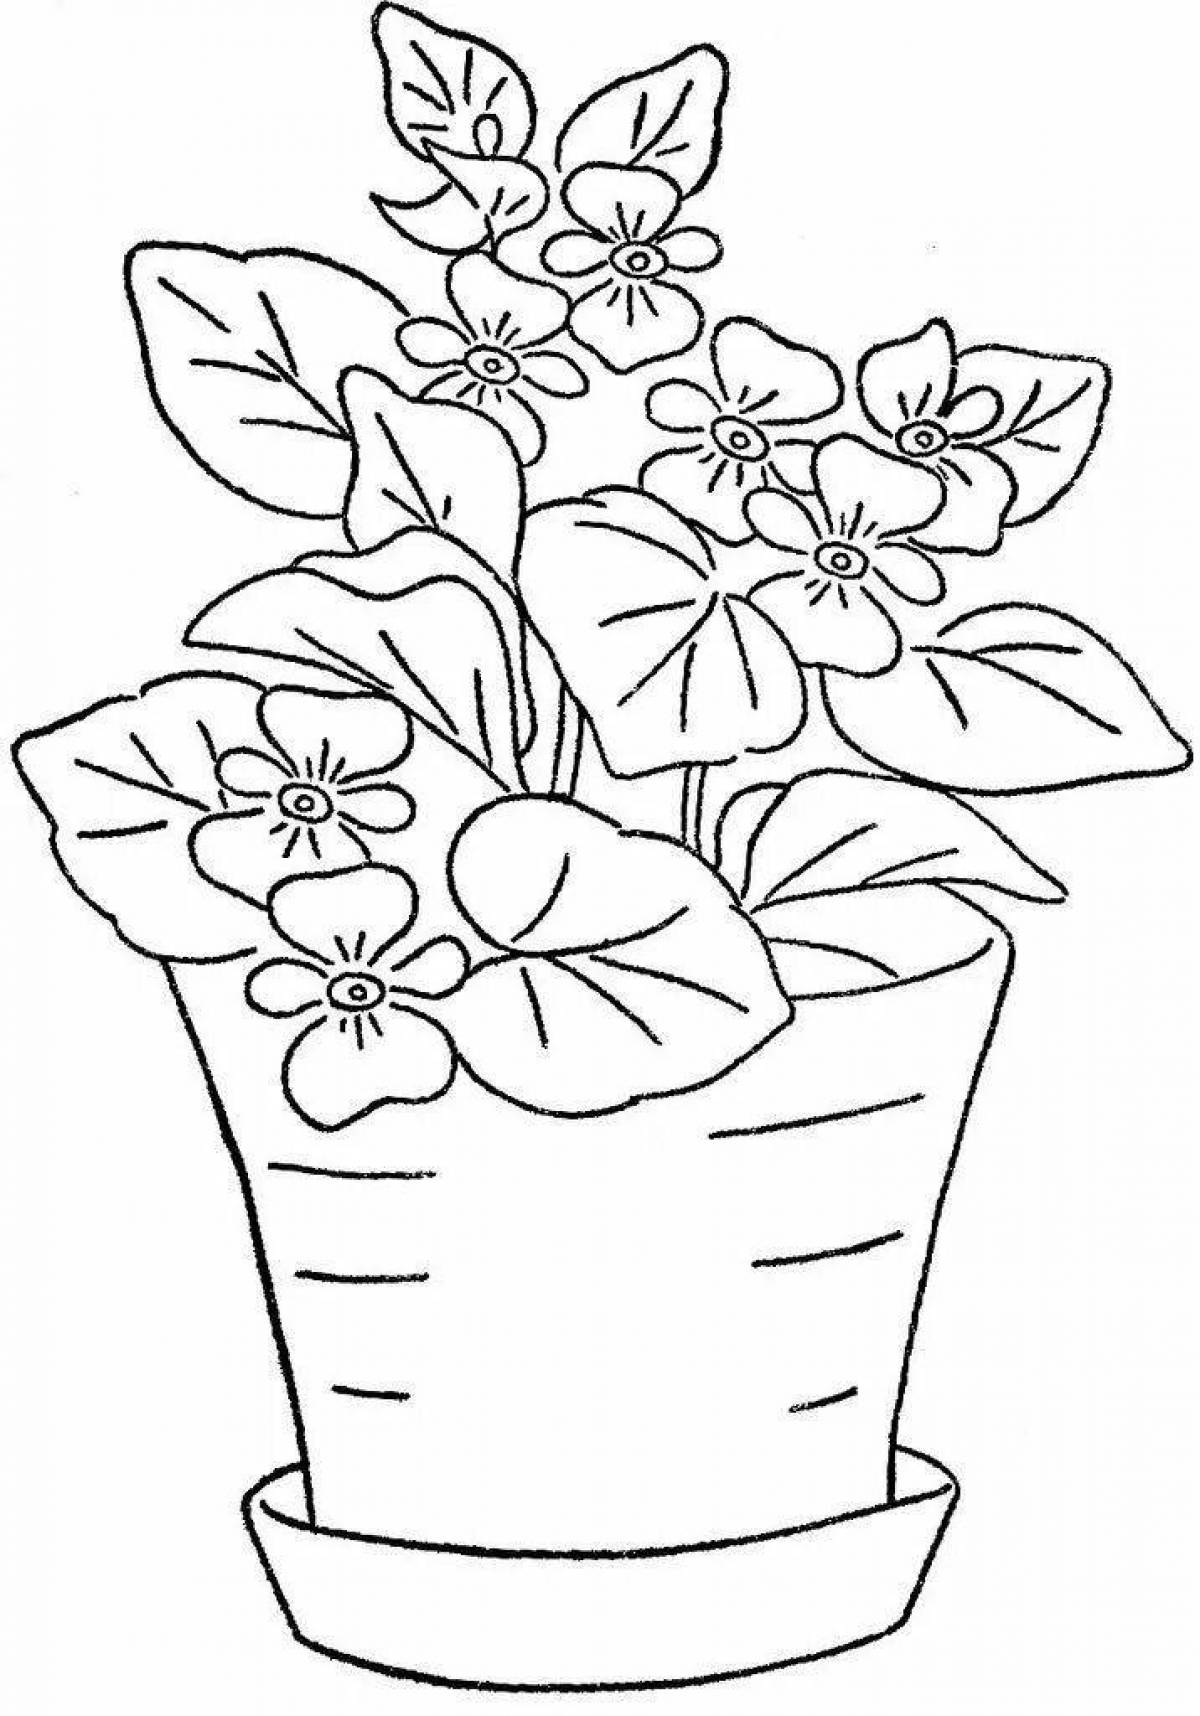 Shining coloring room flowers